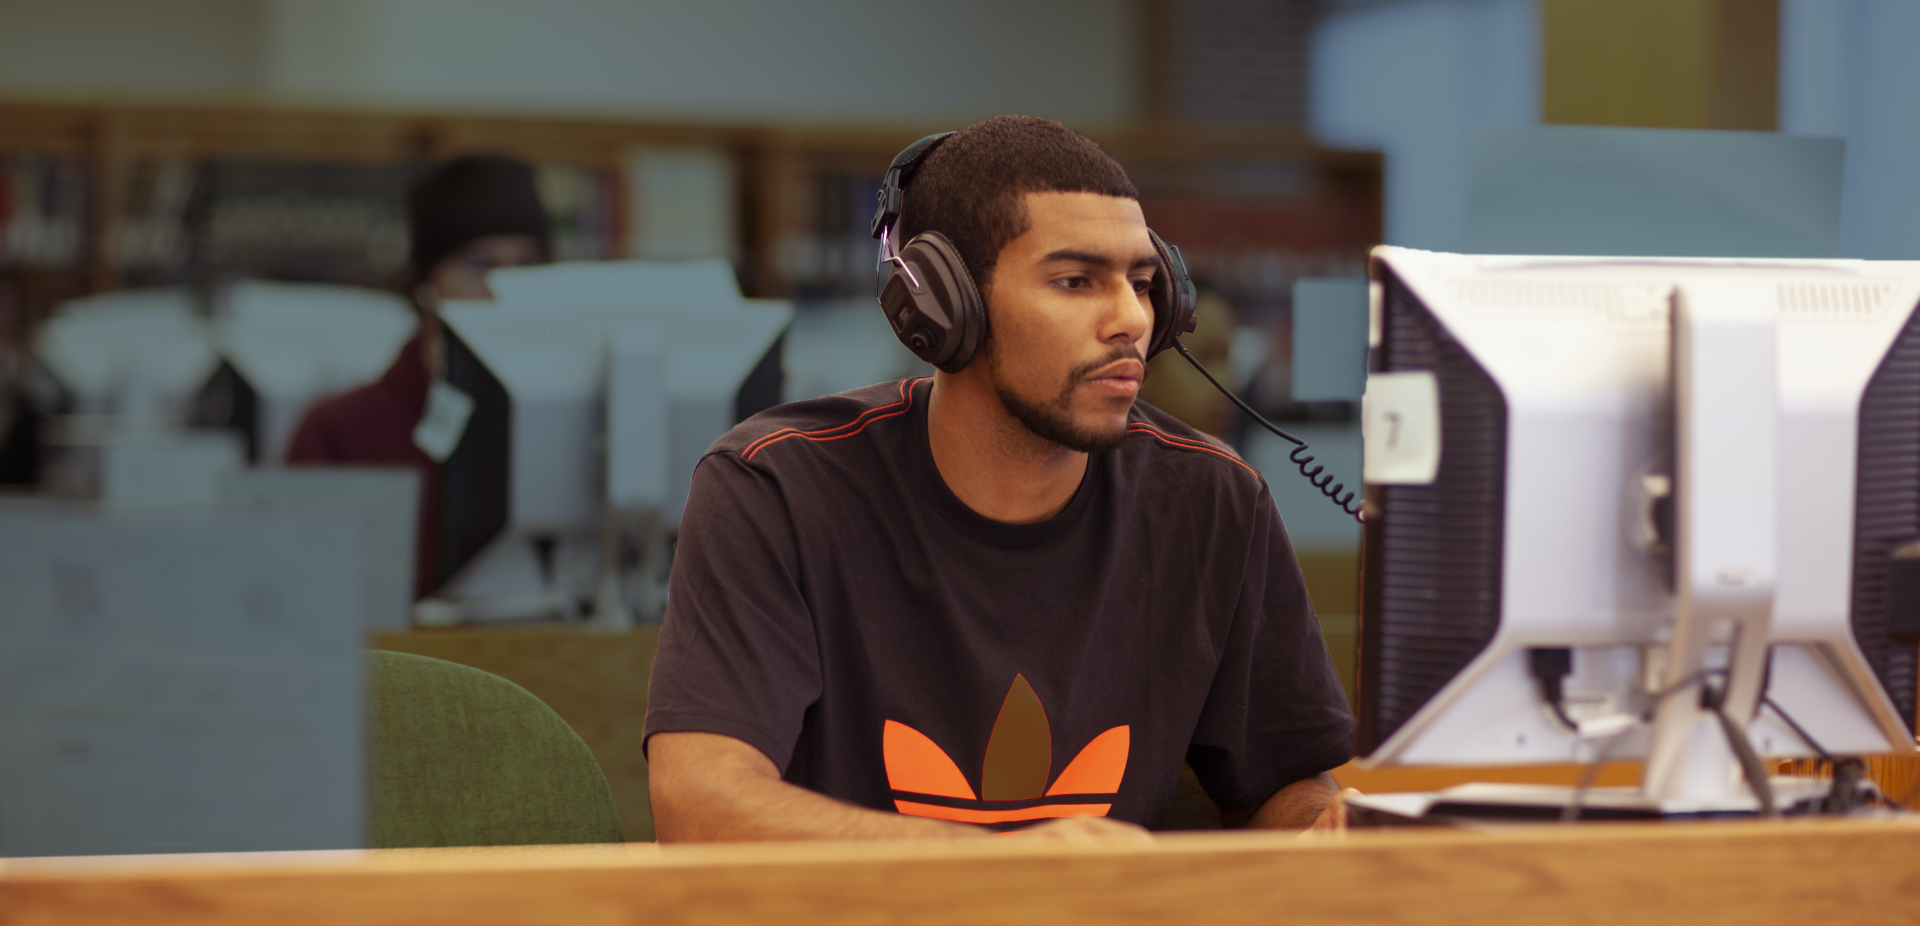 Student wearing headphones using a computer on campus.